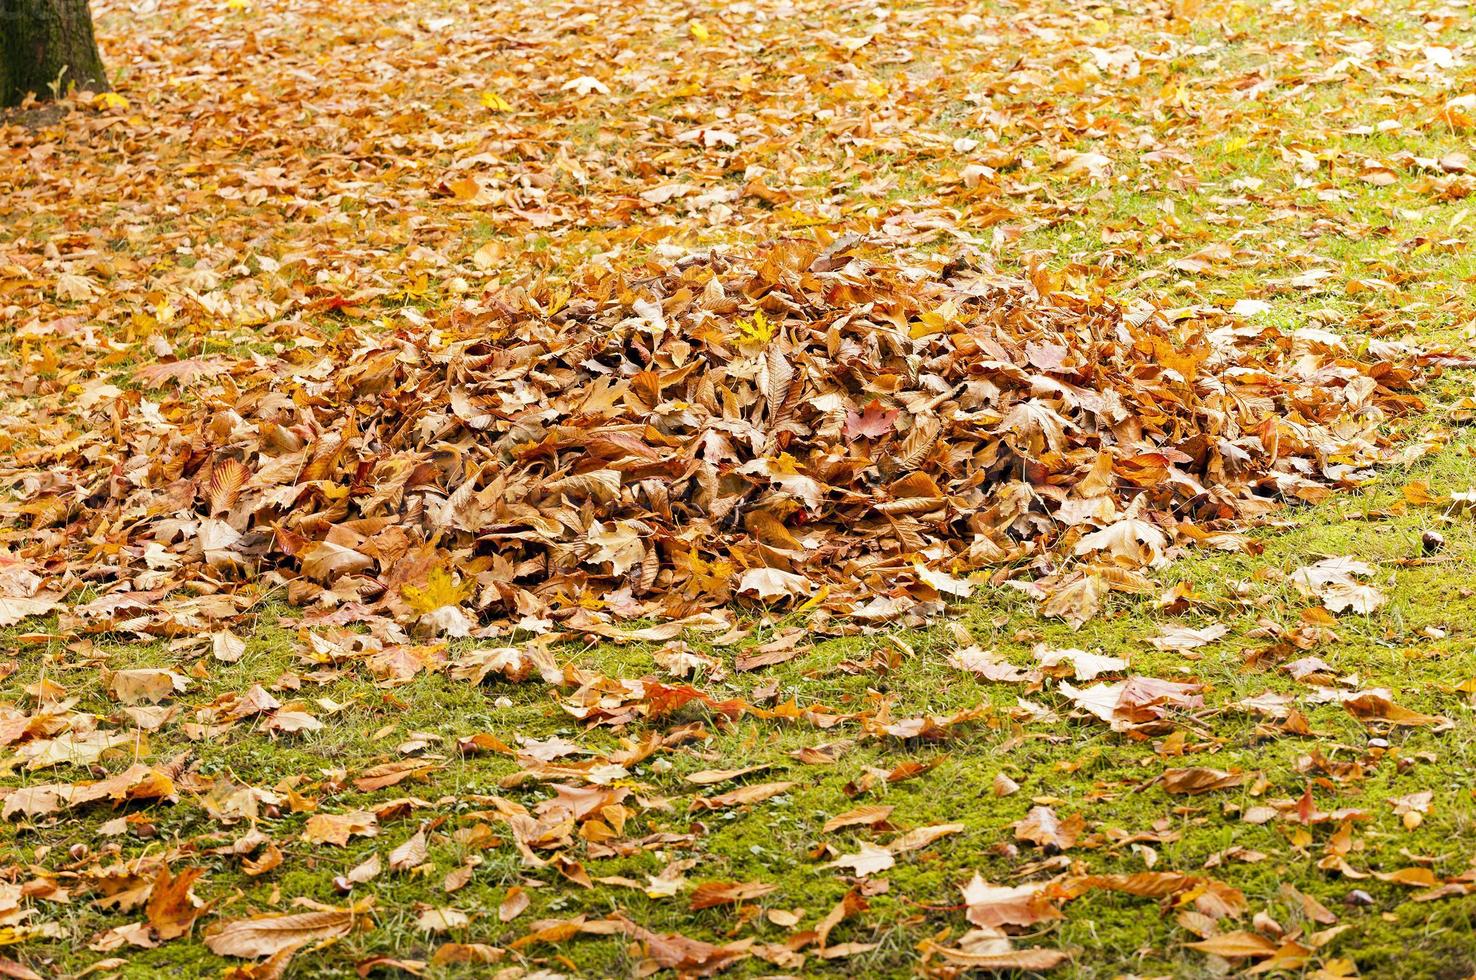 fallen leaves of trees photo